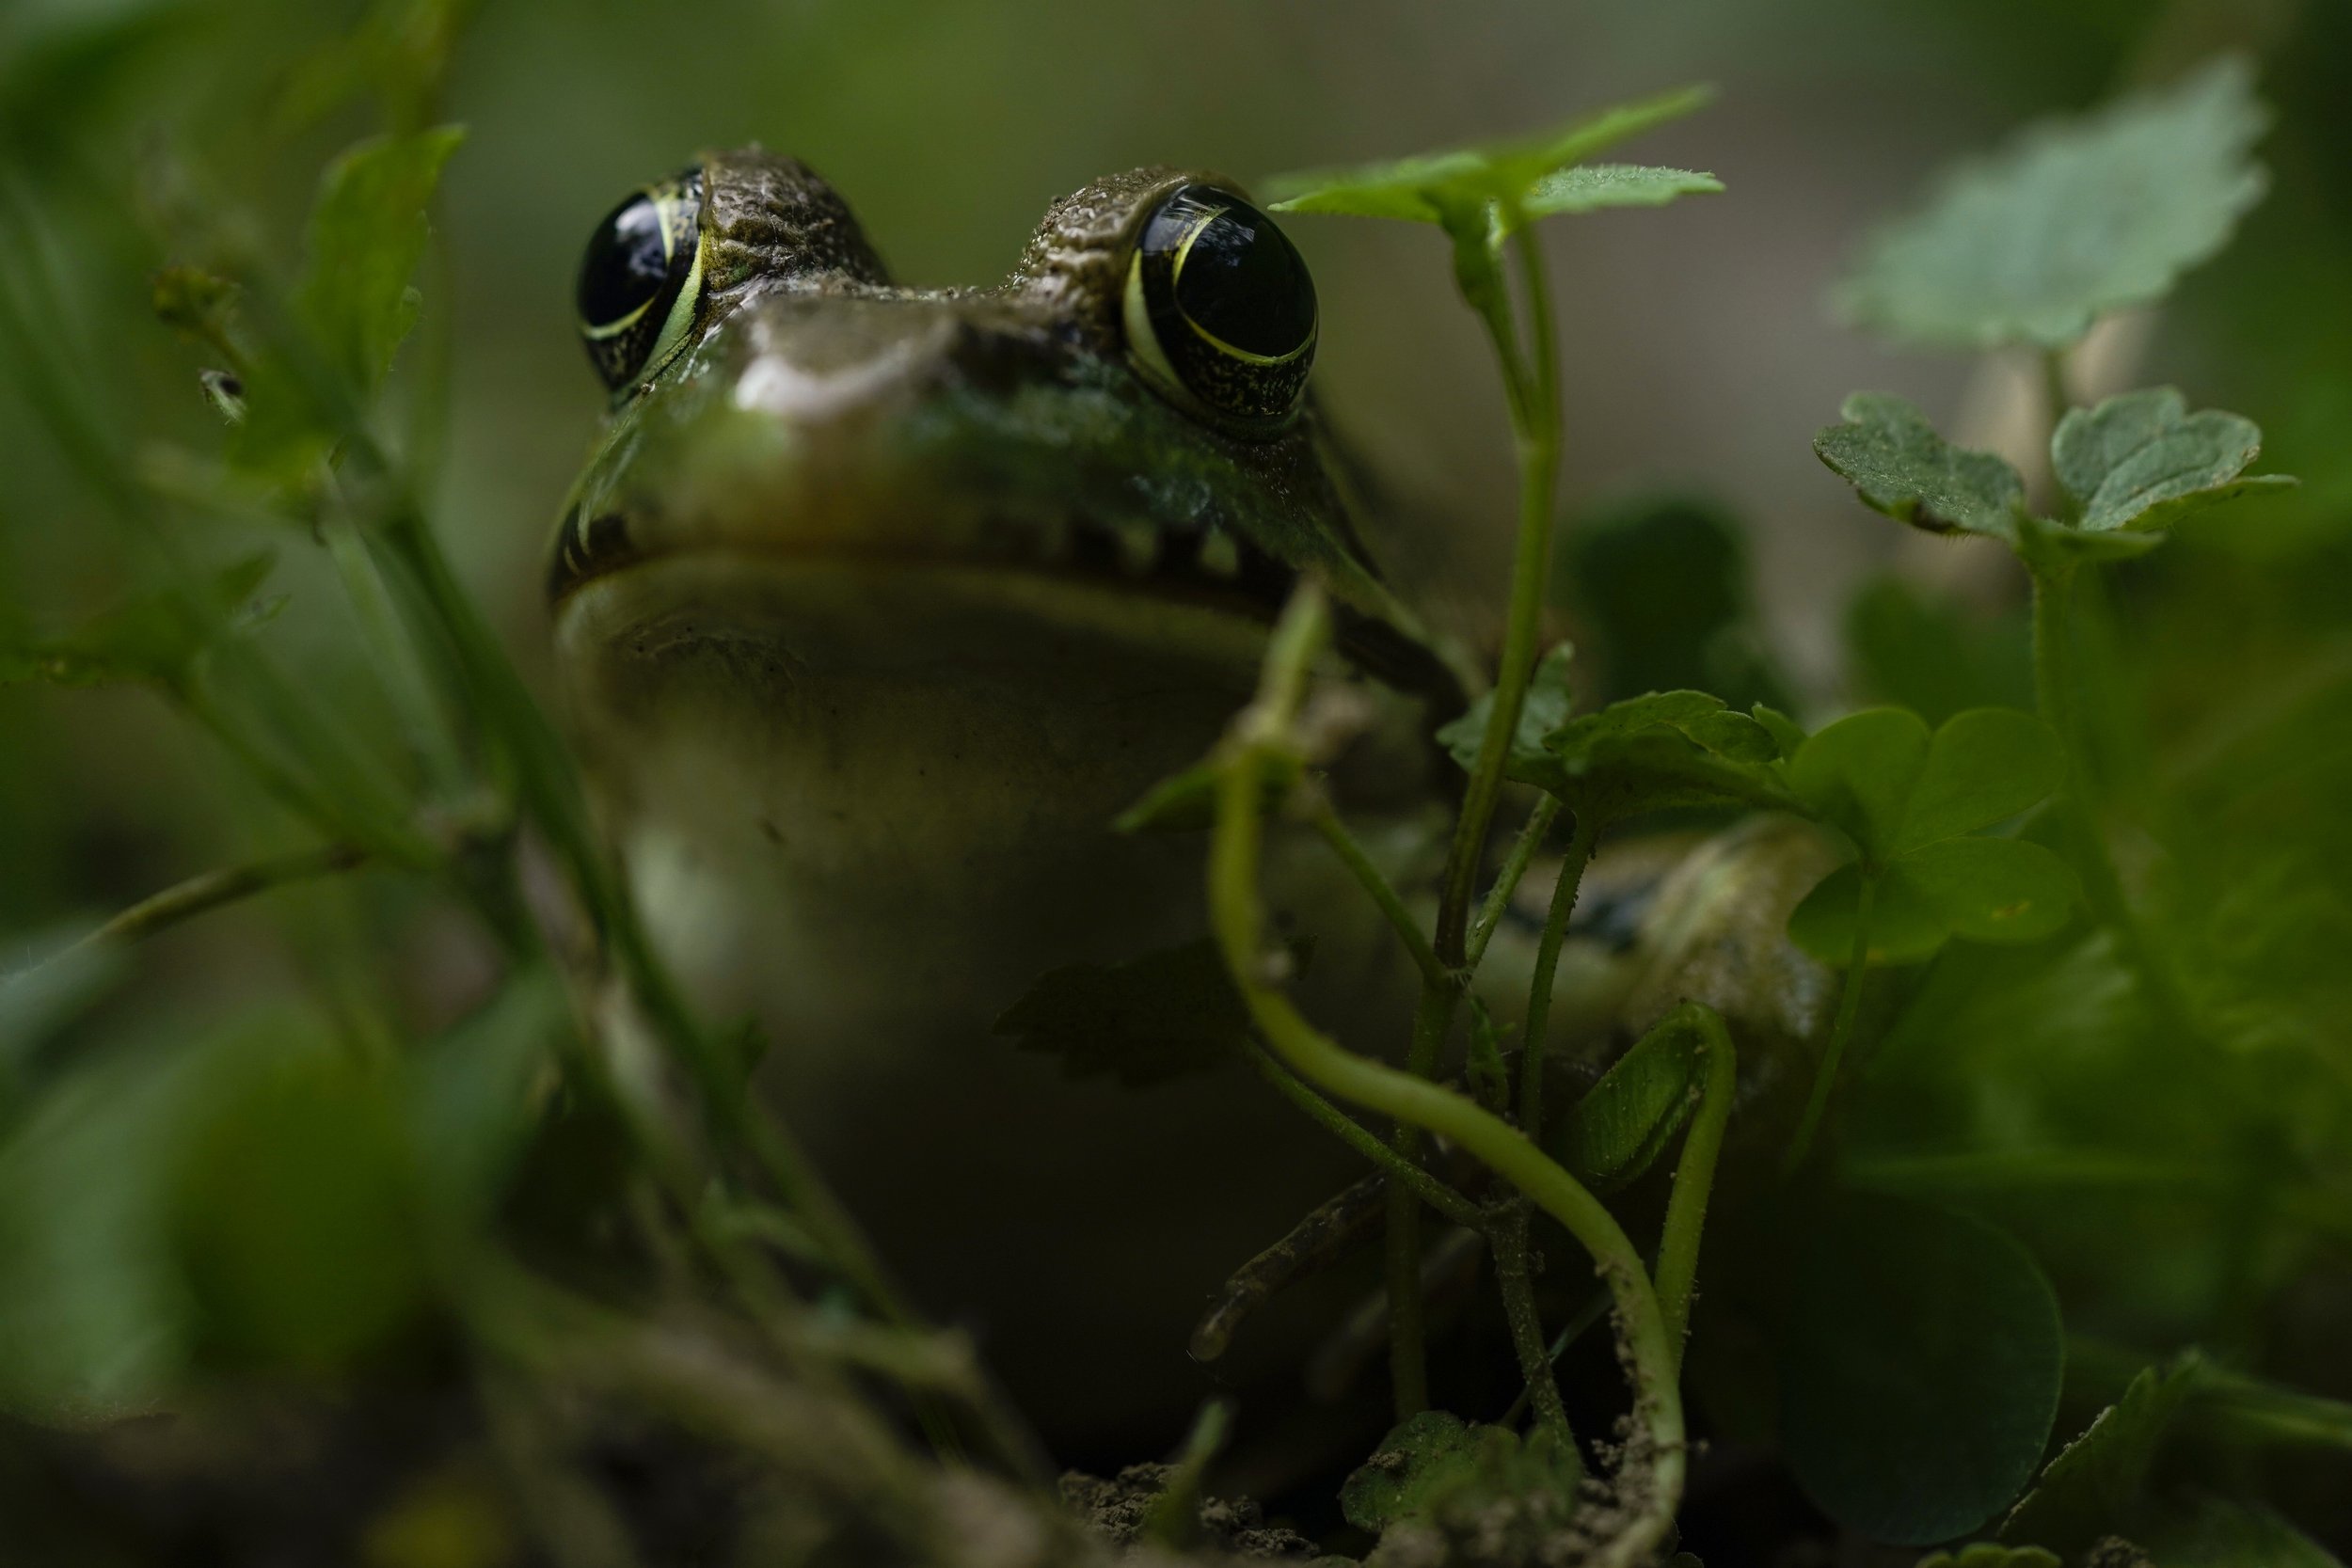  A wood frog looks out from the clover in East Waterford, Pa., on June 6, 2021. (AP Photo/Carolyn Kaster) 